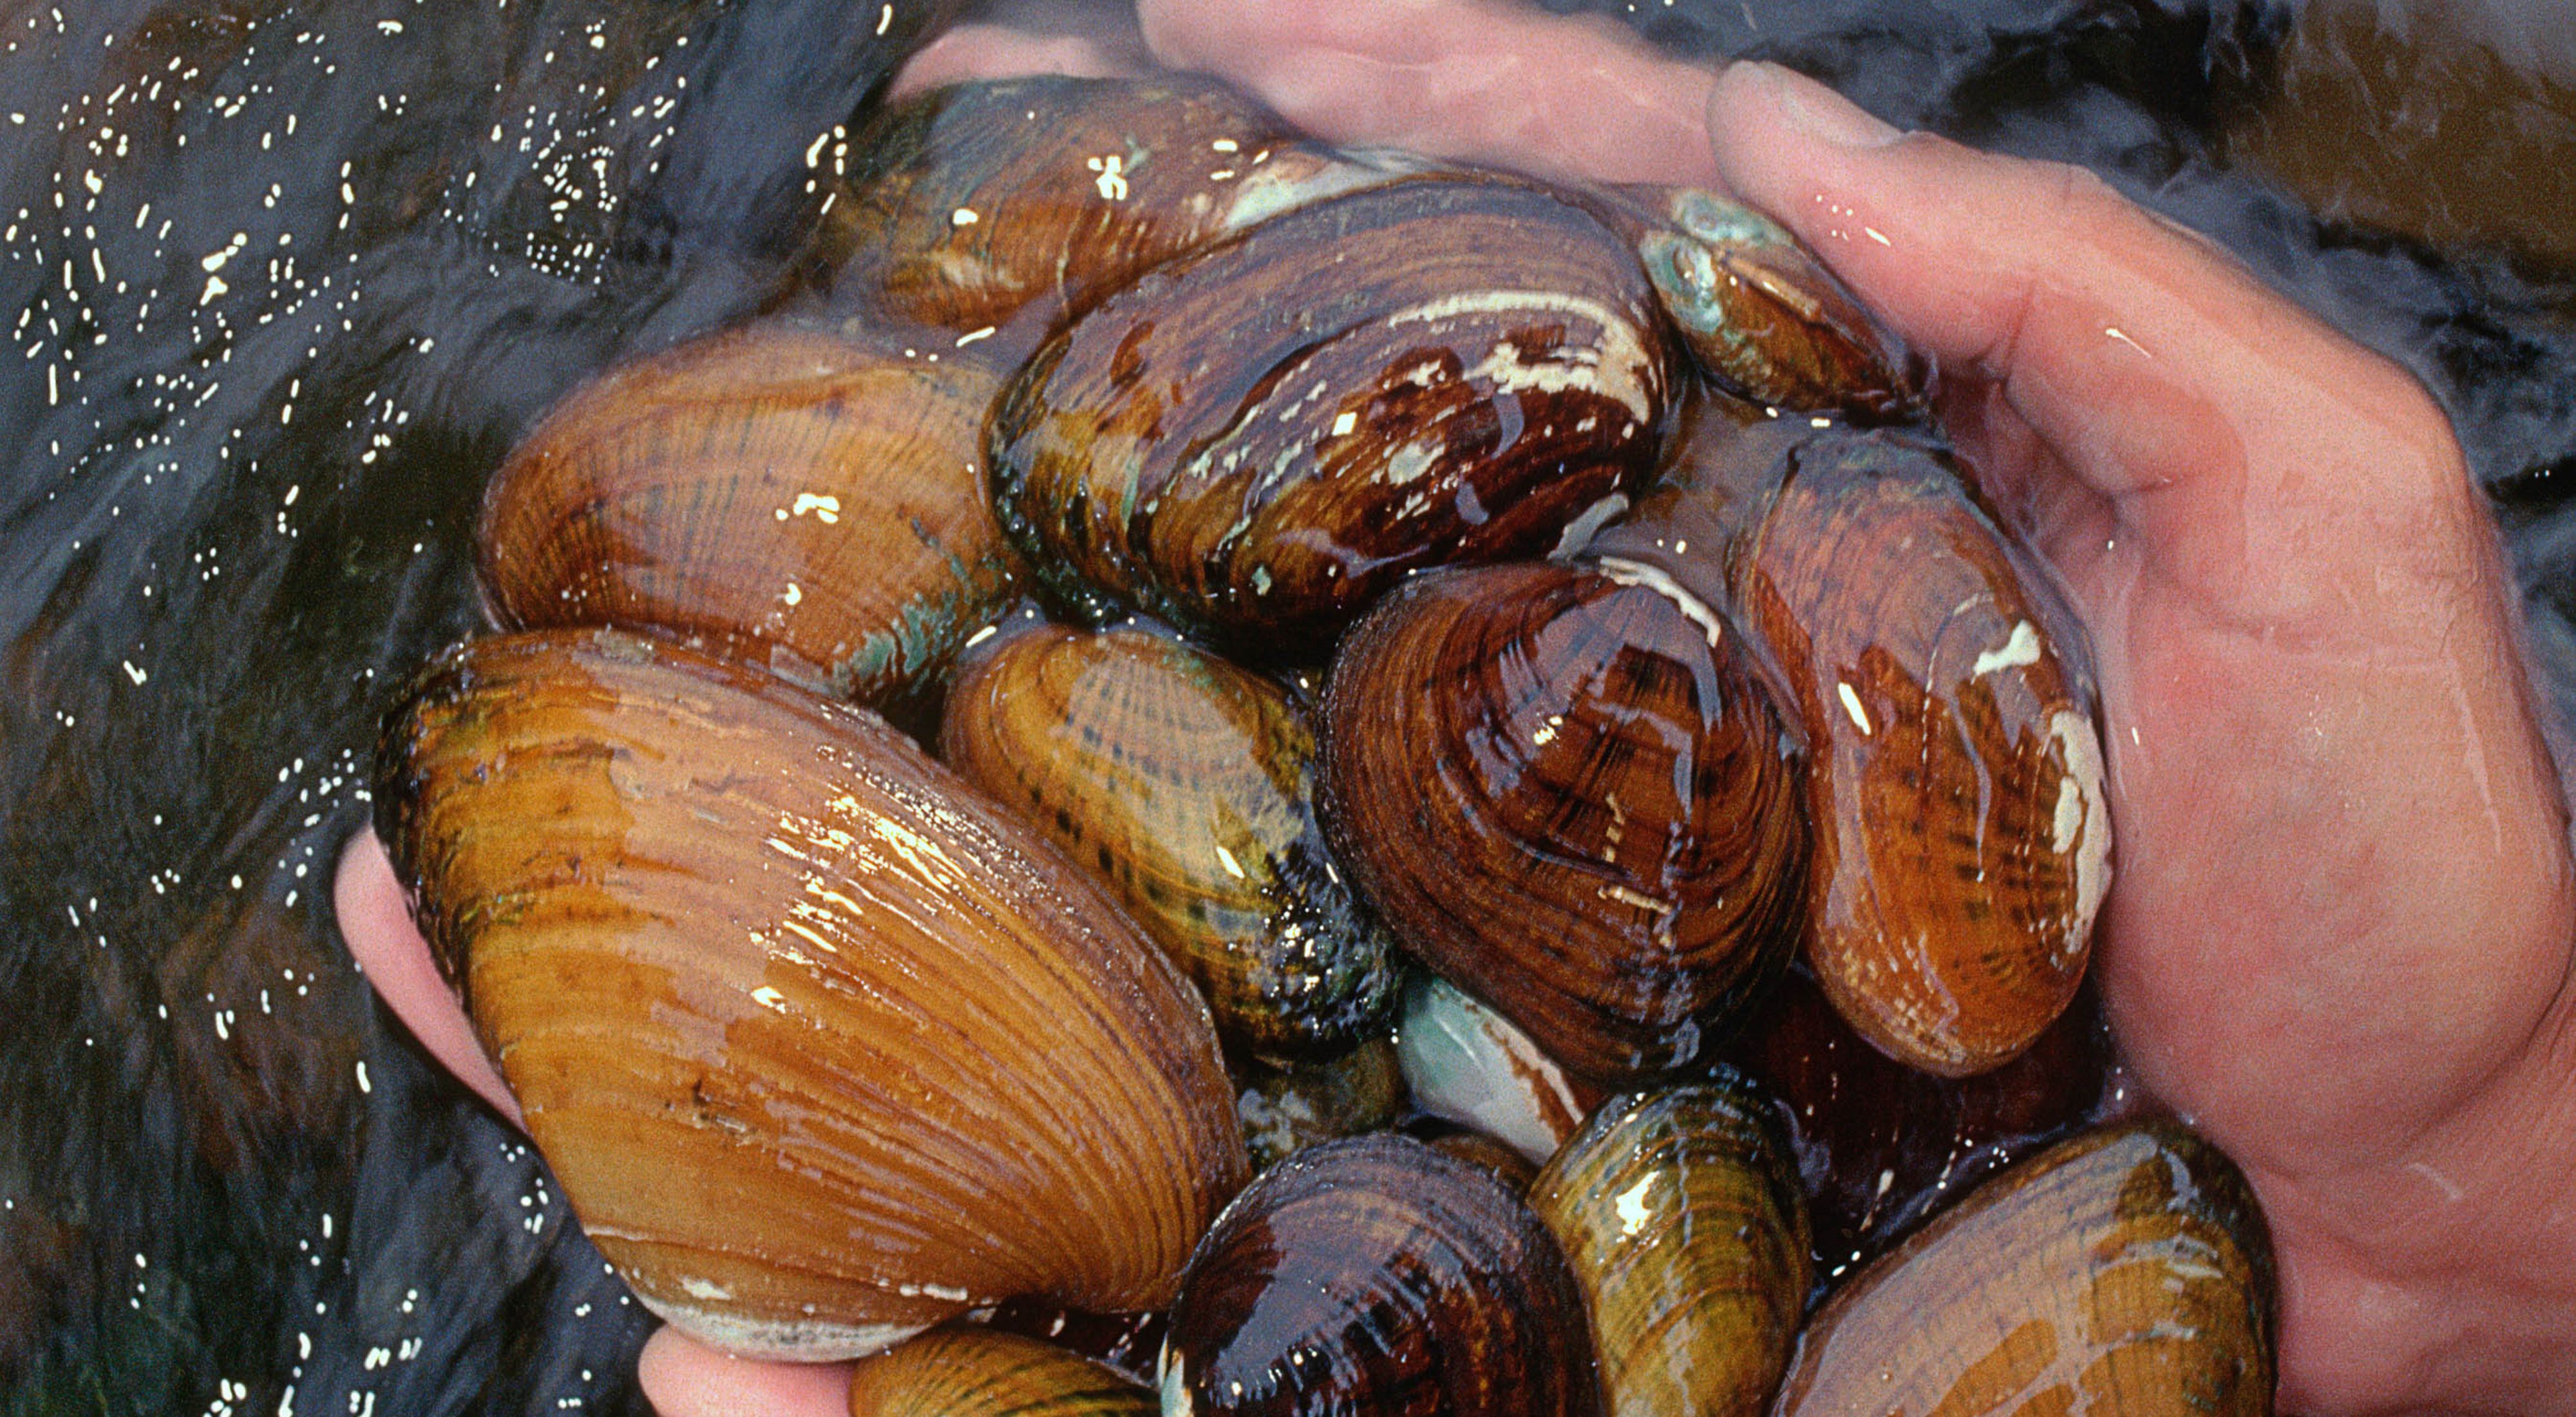 Hands holding freshwater mussels